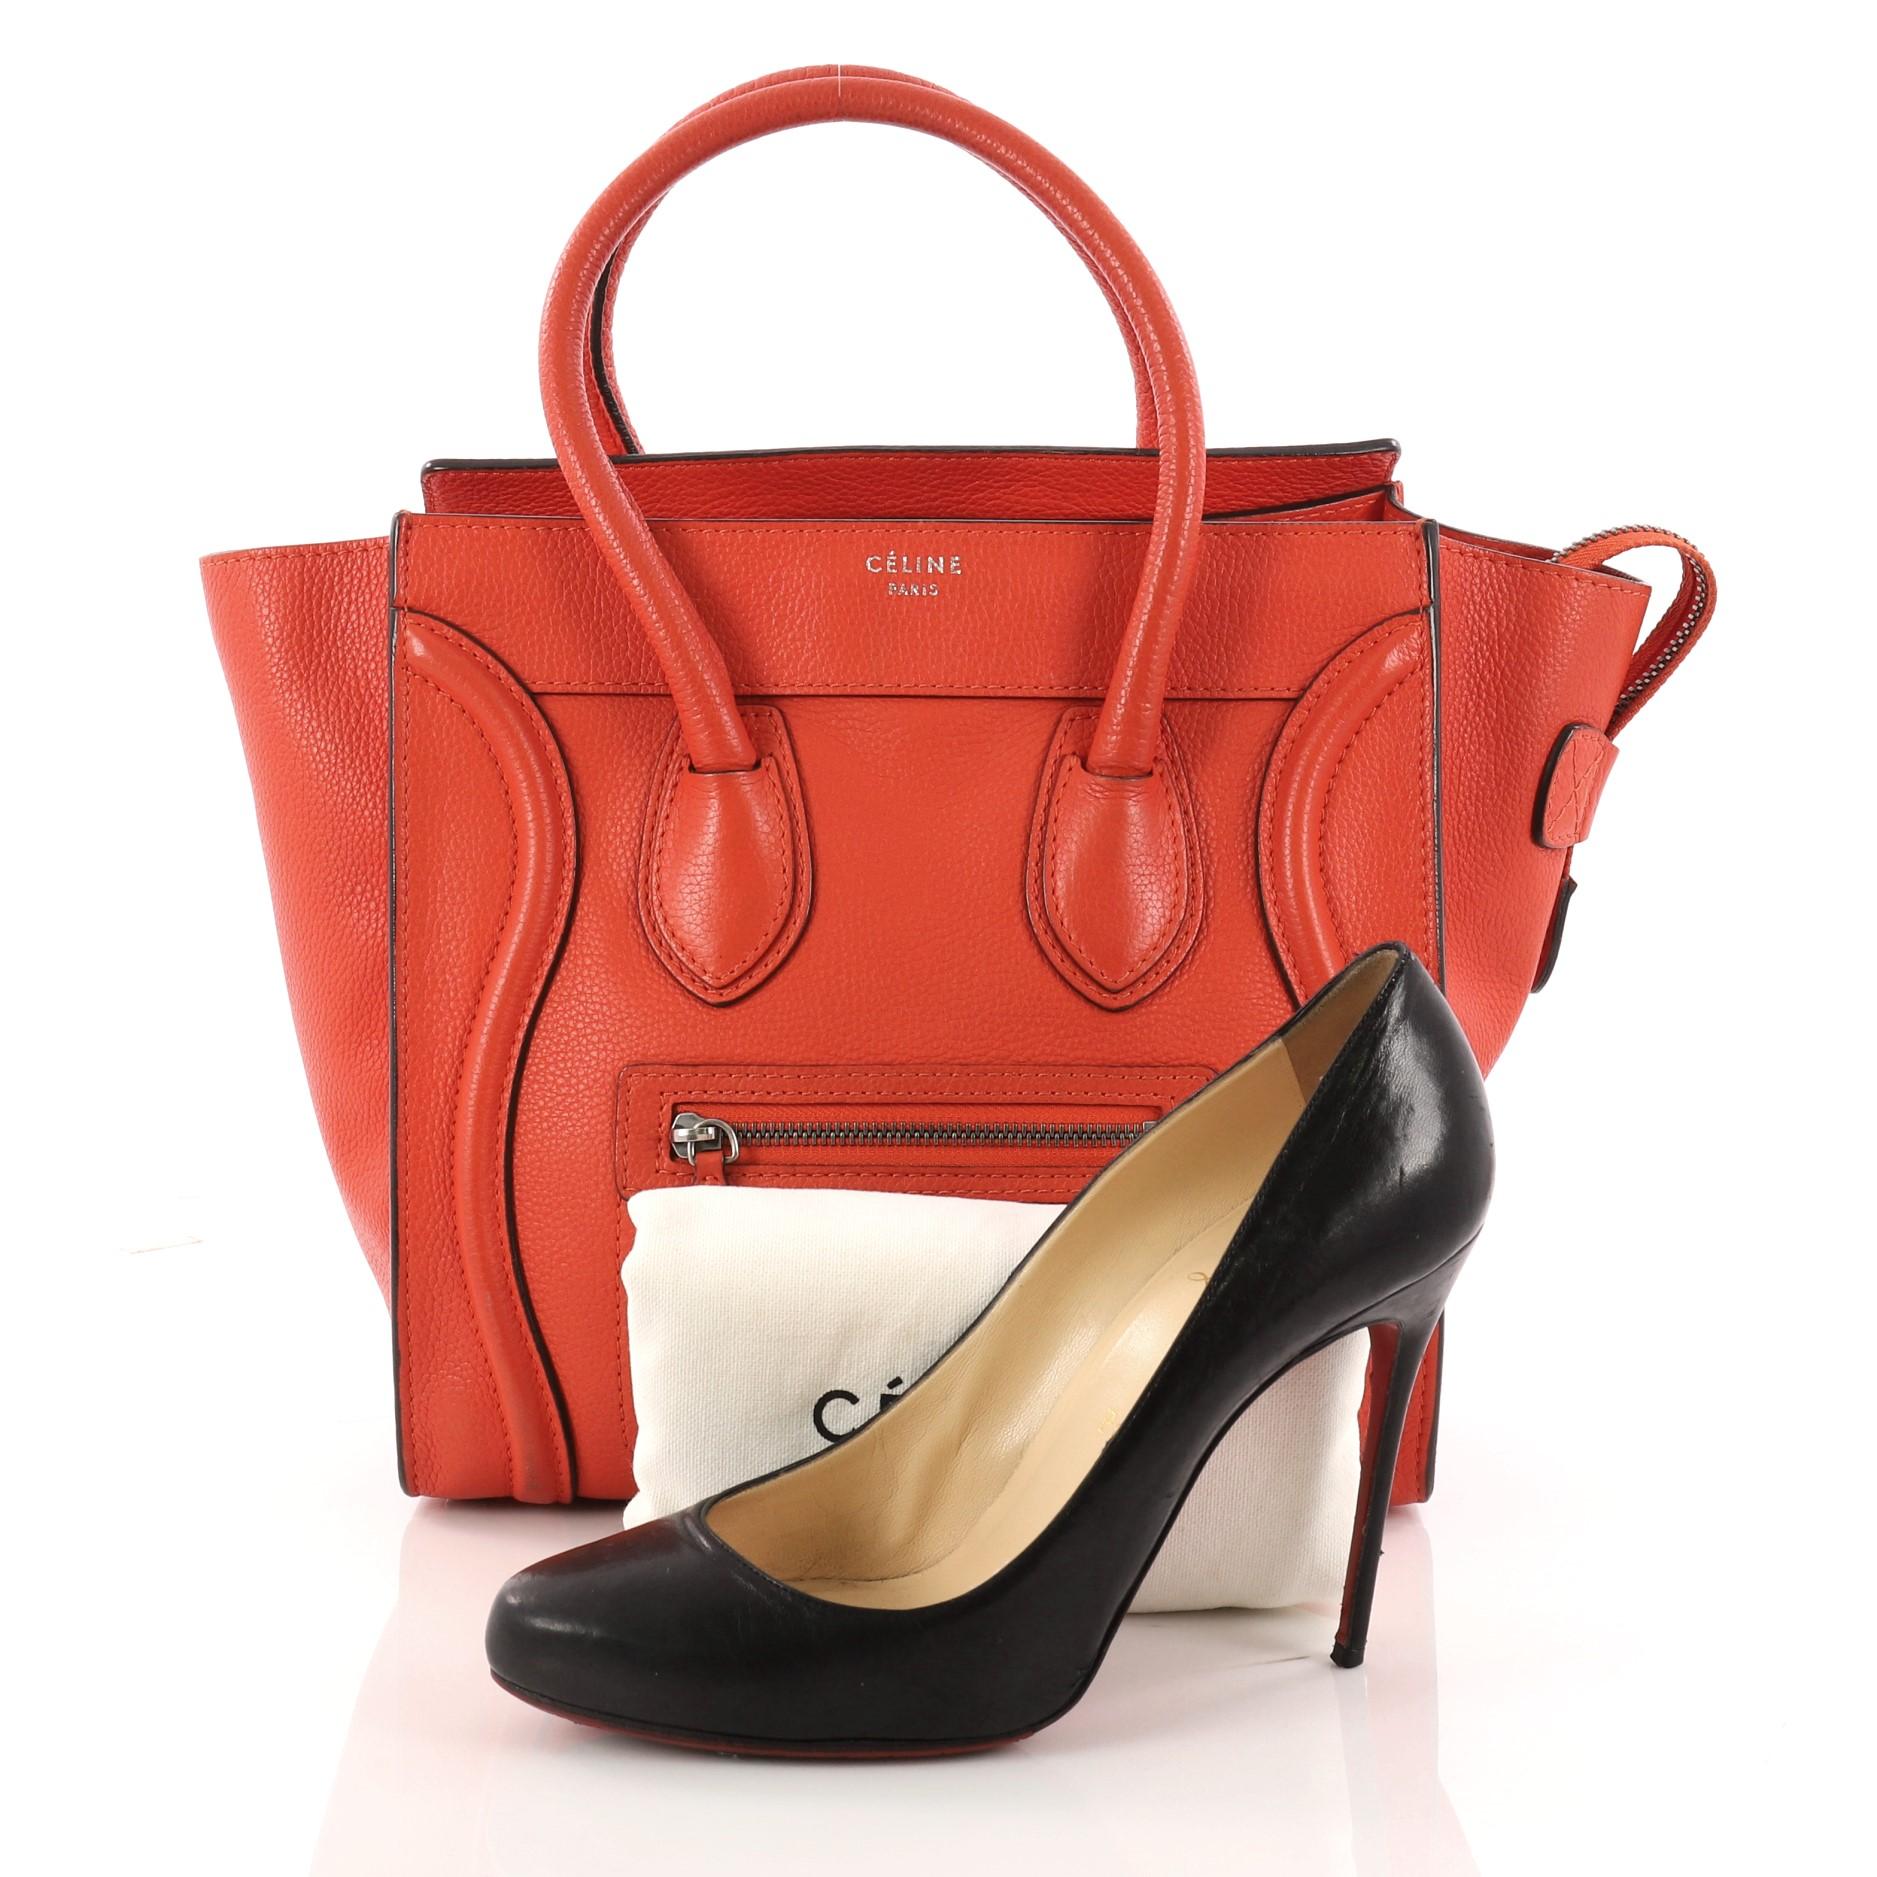 This authentic Celine Luggage Handbag Grainy Leather Micro is one of the most sought-after bags beloved by fashionistas. Crafted from red-orange grainy leather, this minimalist tote features dual-rolled handles, an exterior front pocket, stamped